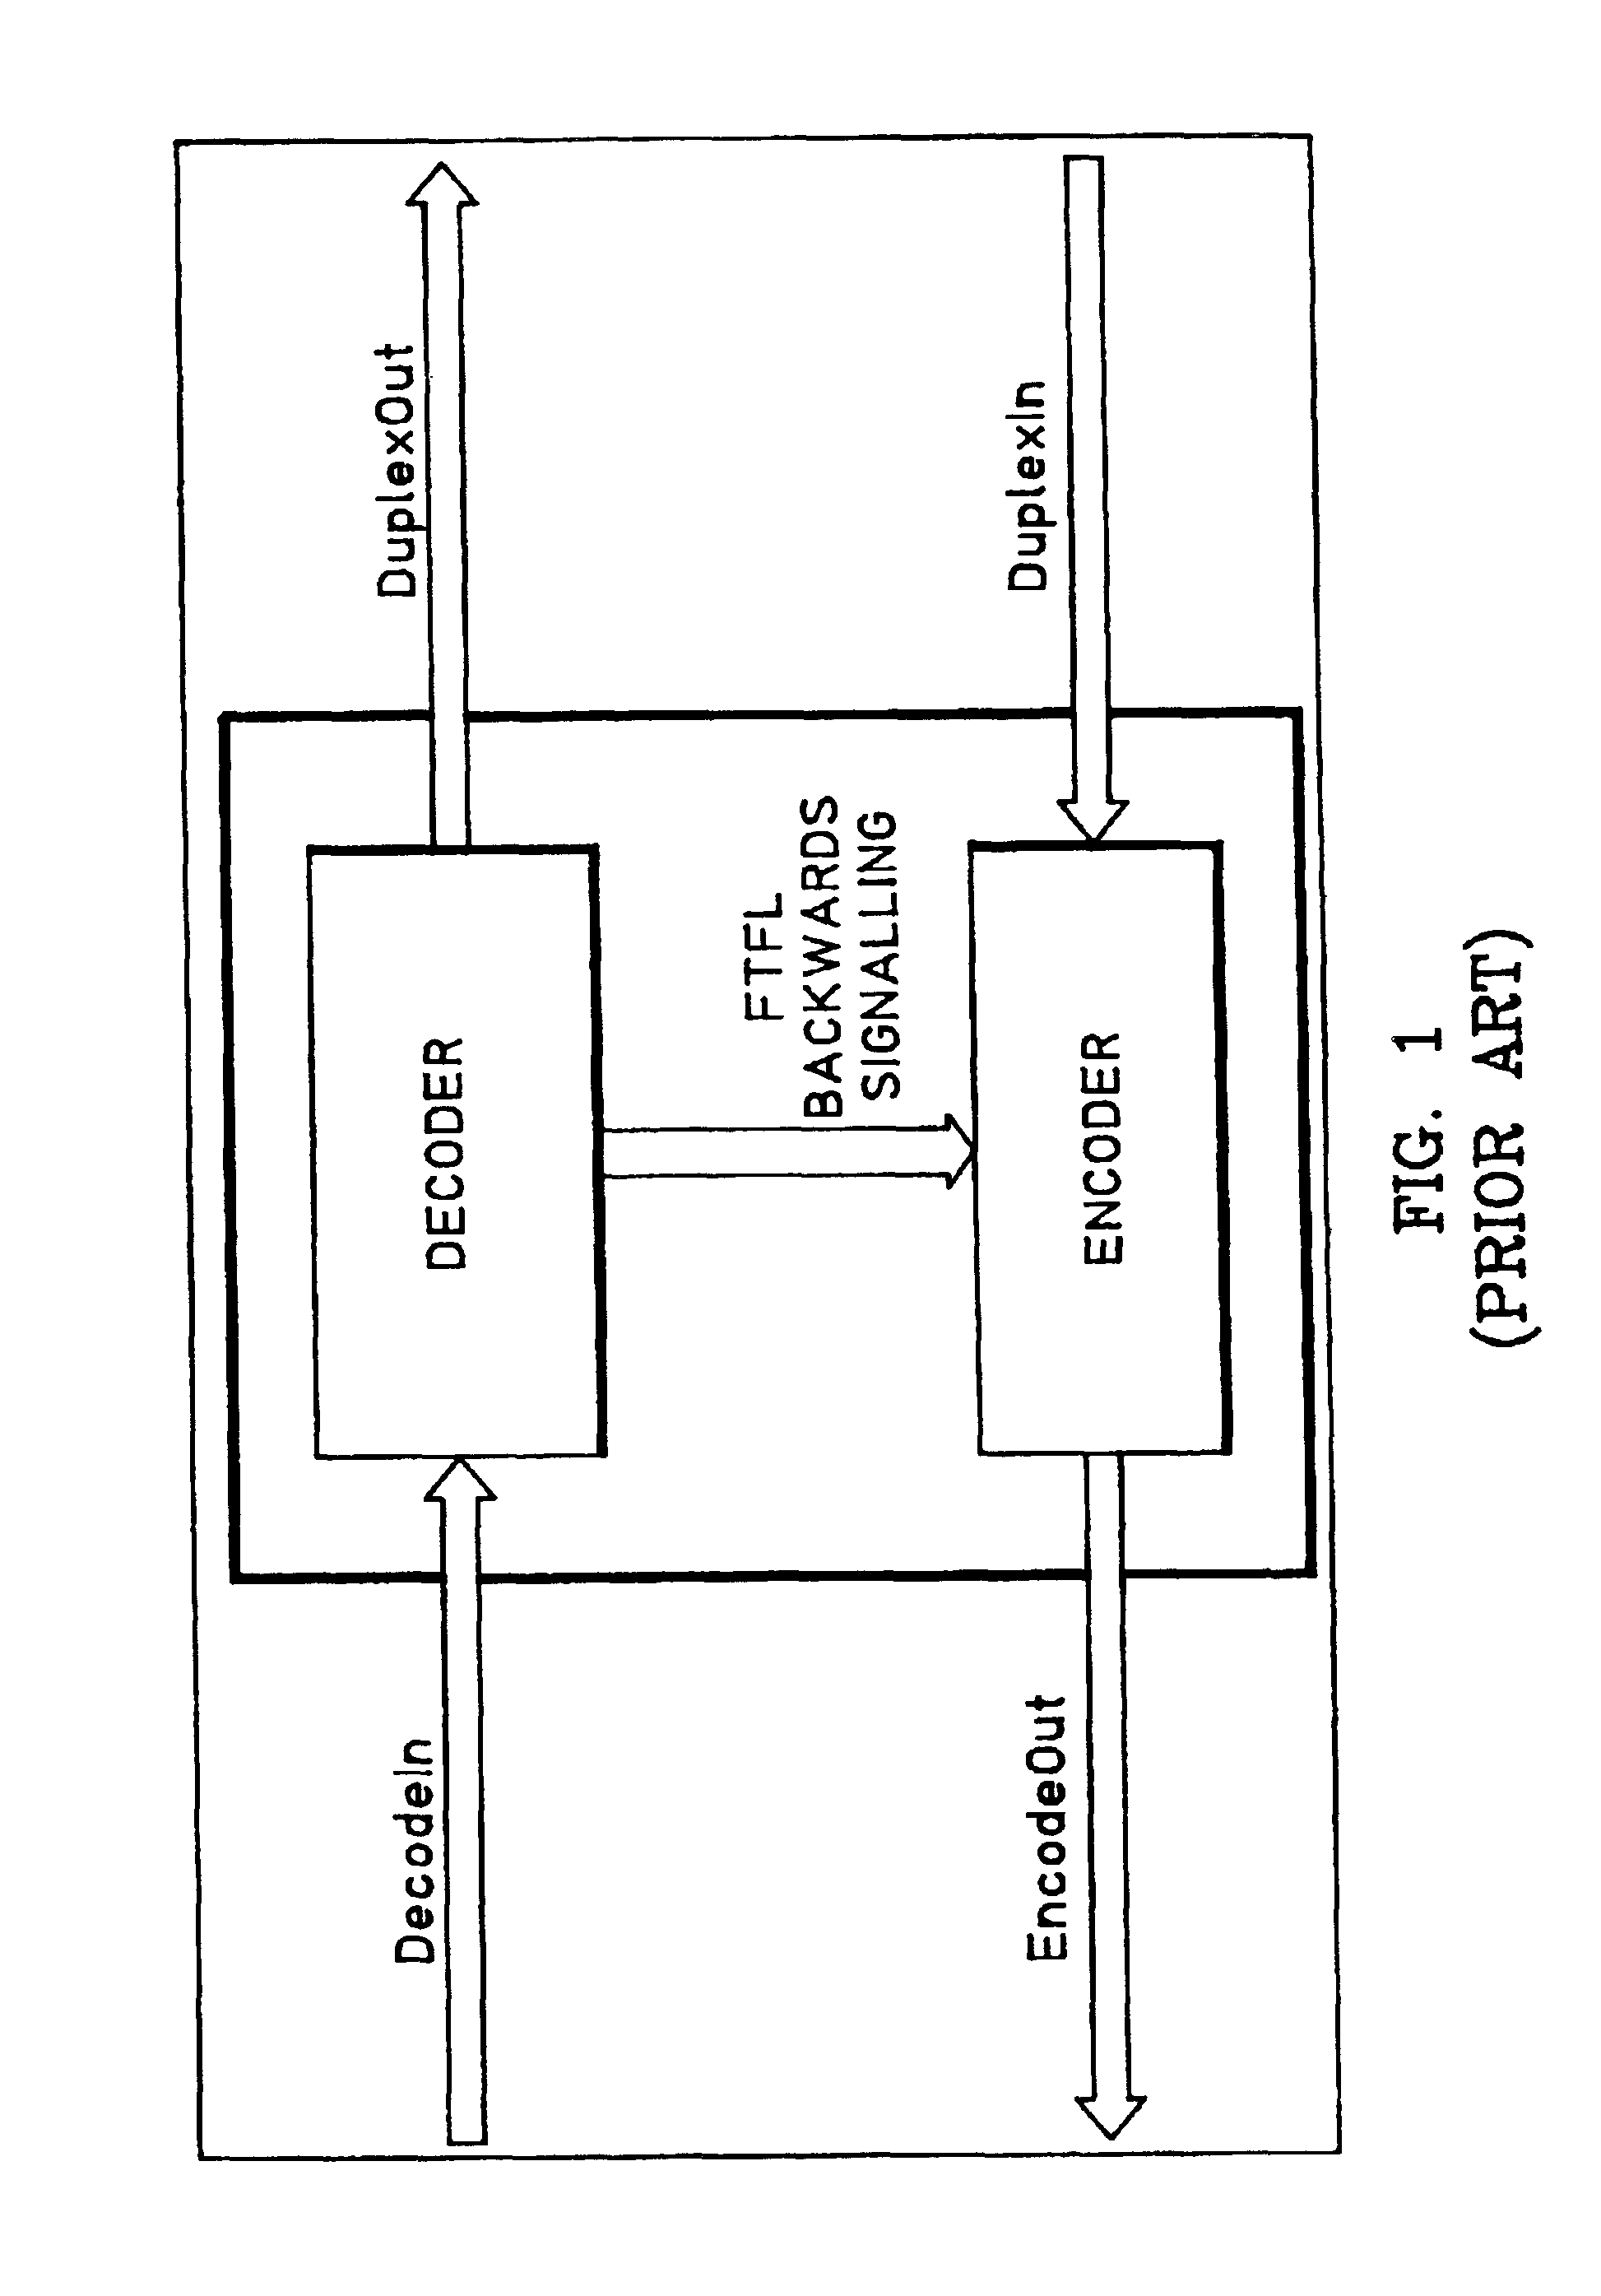 System and method for communicating fault type and fault location messages